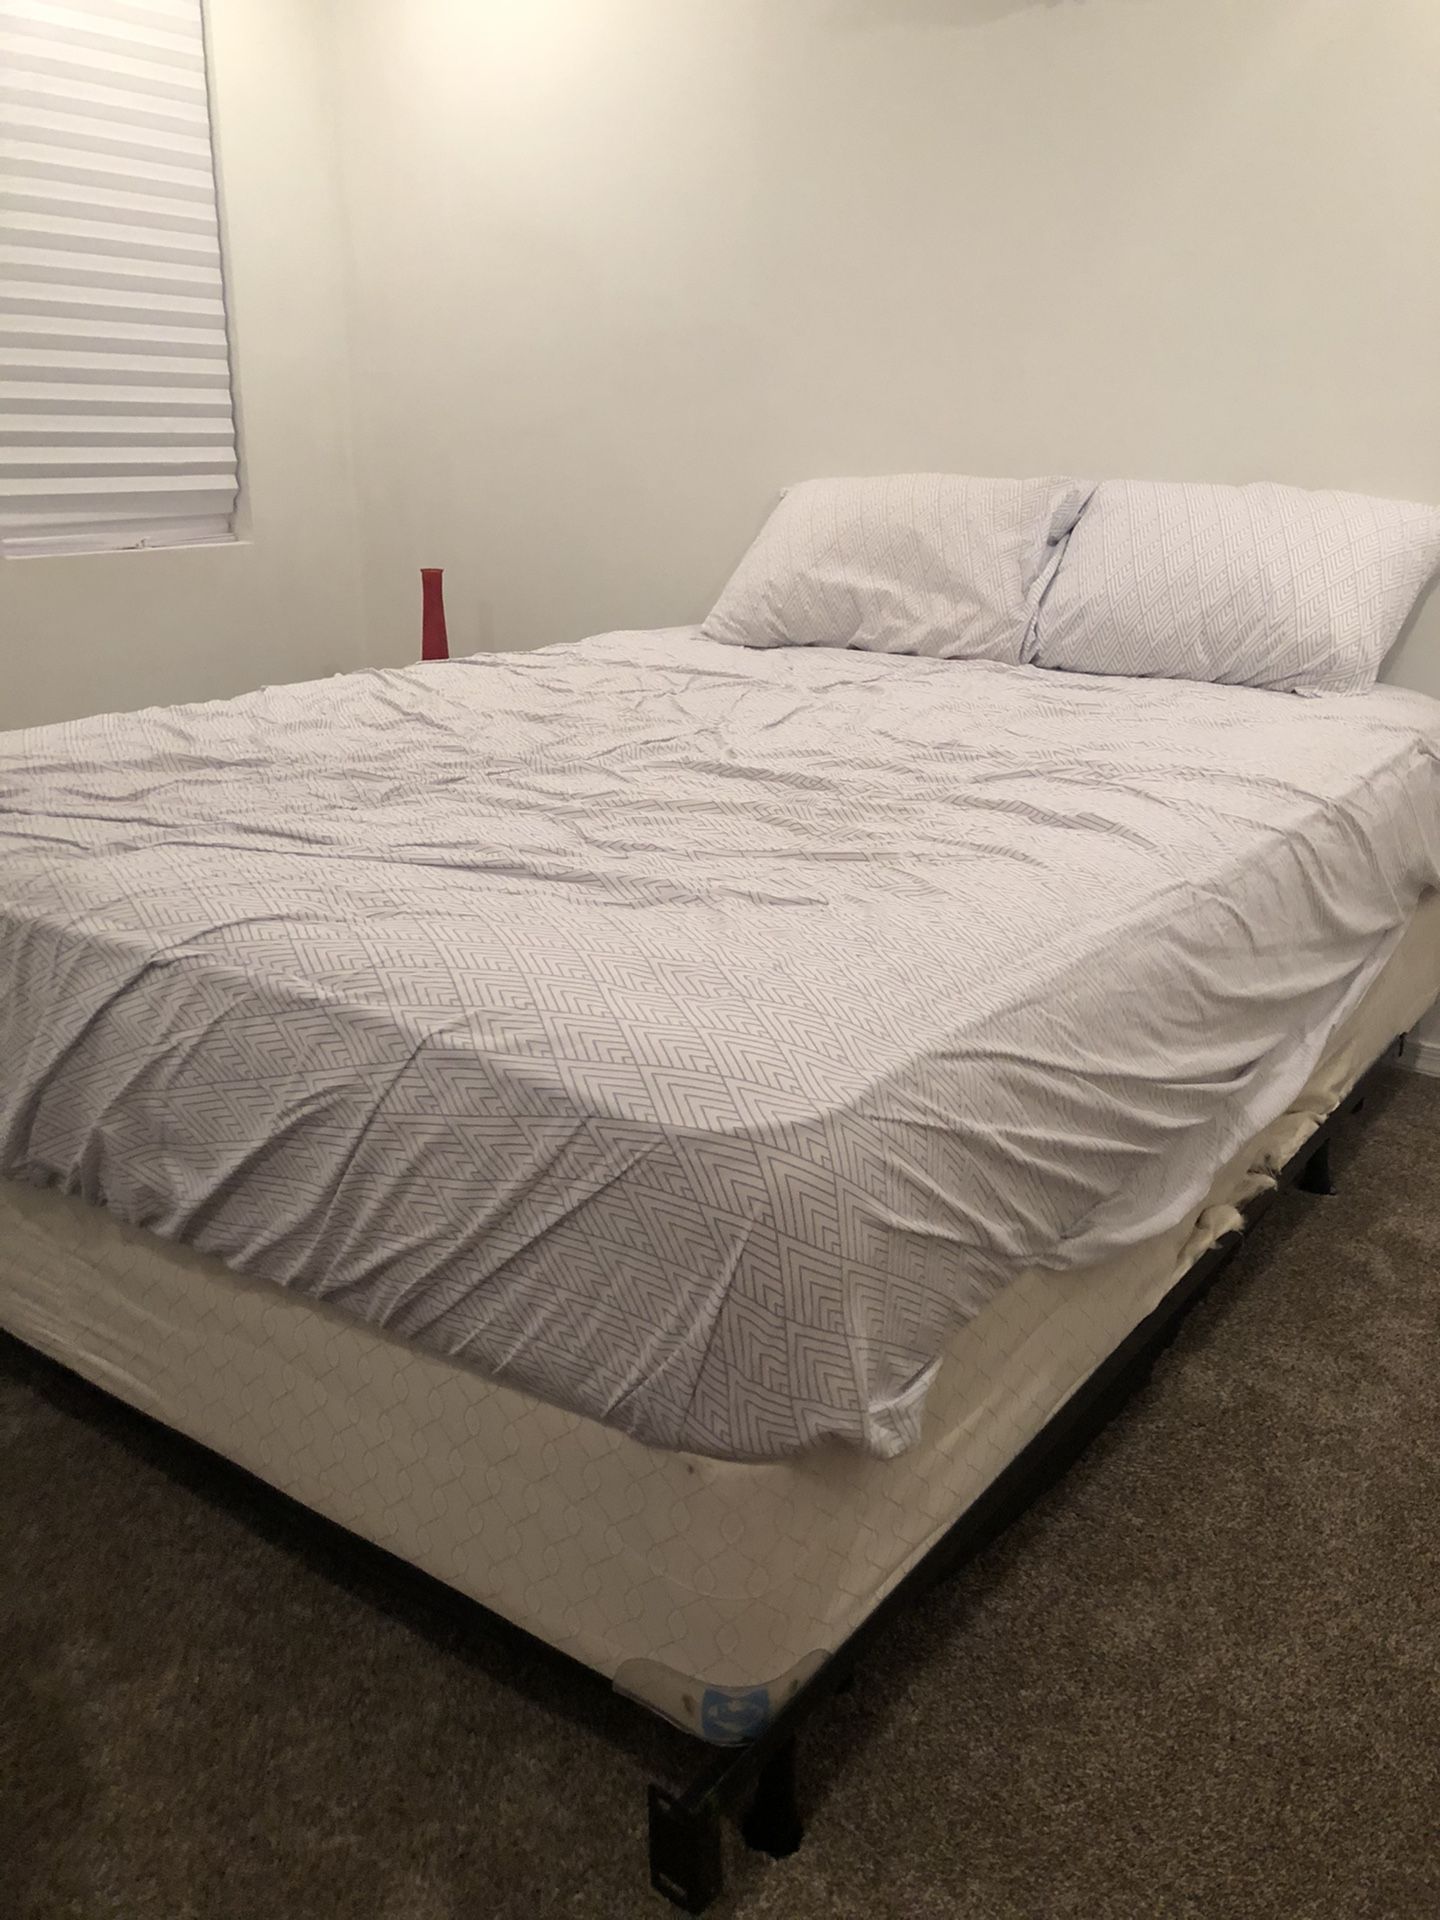 Queen bed set for sale: mattress,box spring, and bed frame